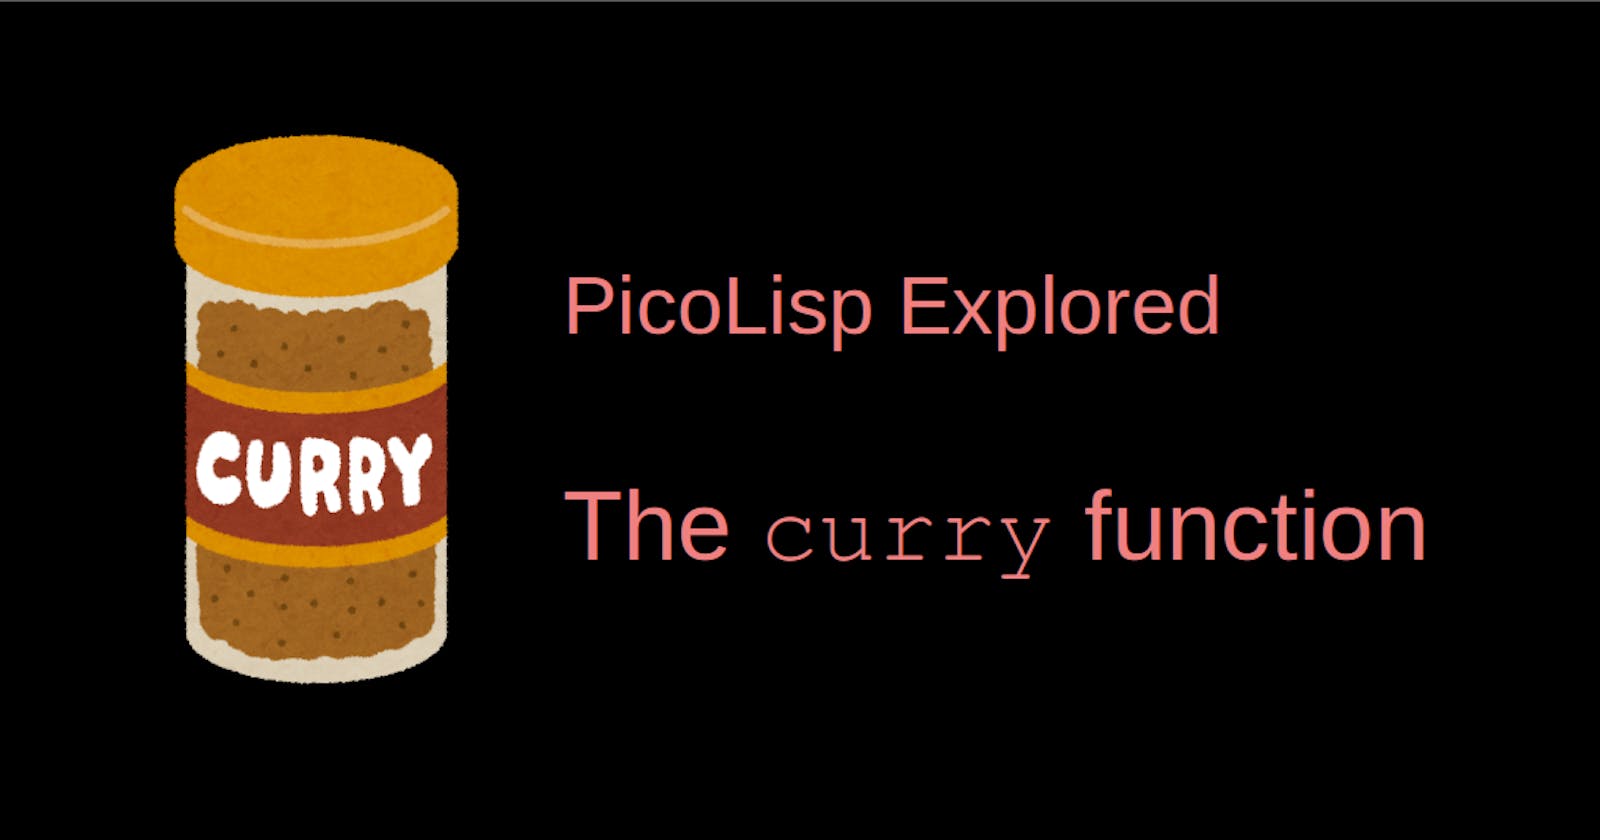 PicoLisp Explored: The curry function